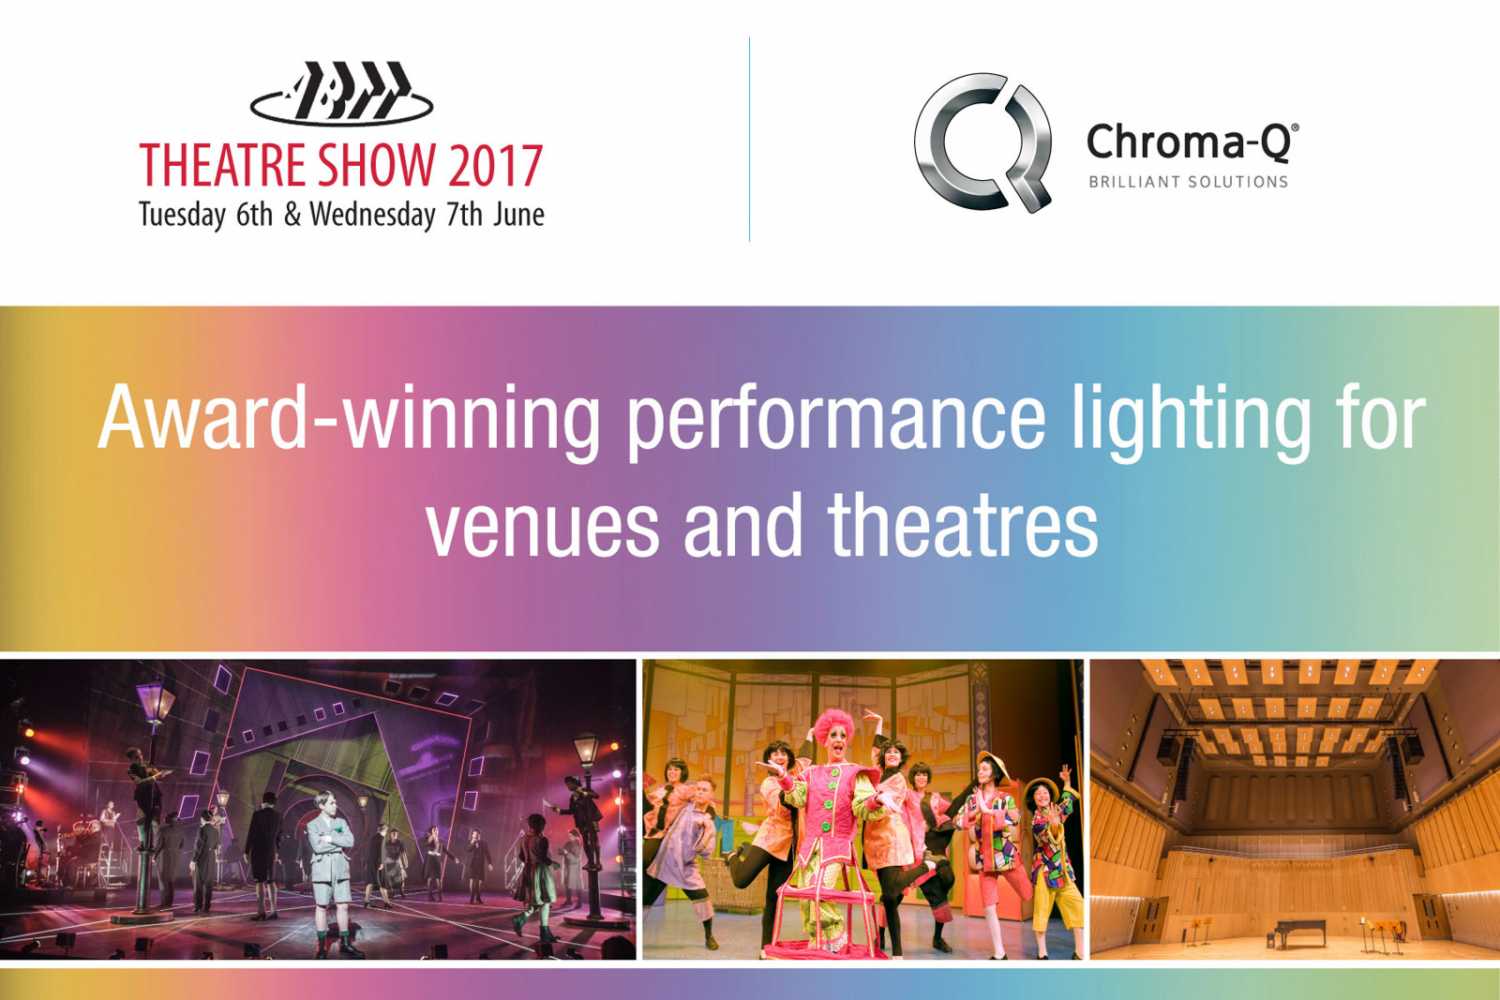 The latest Chroma-Q products for theatre applications will be shown